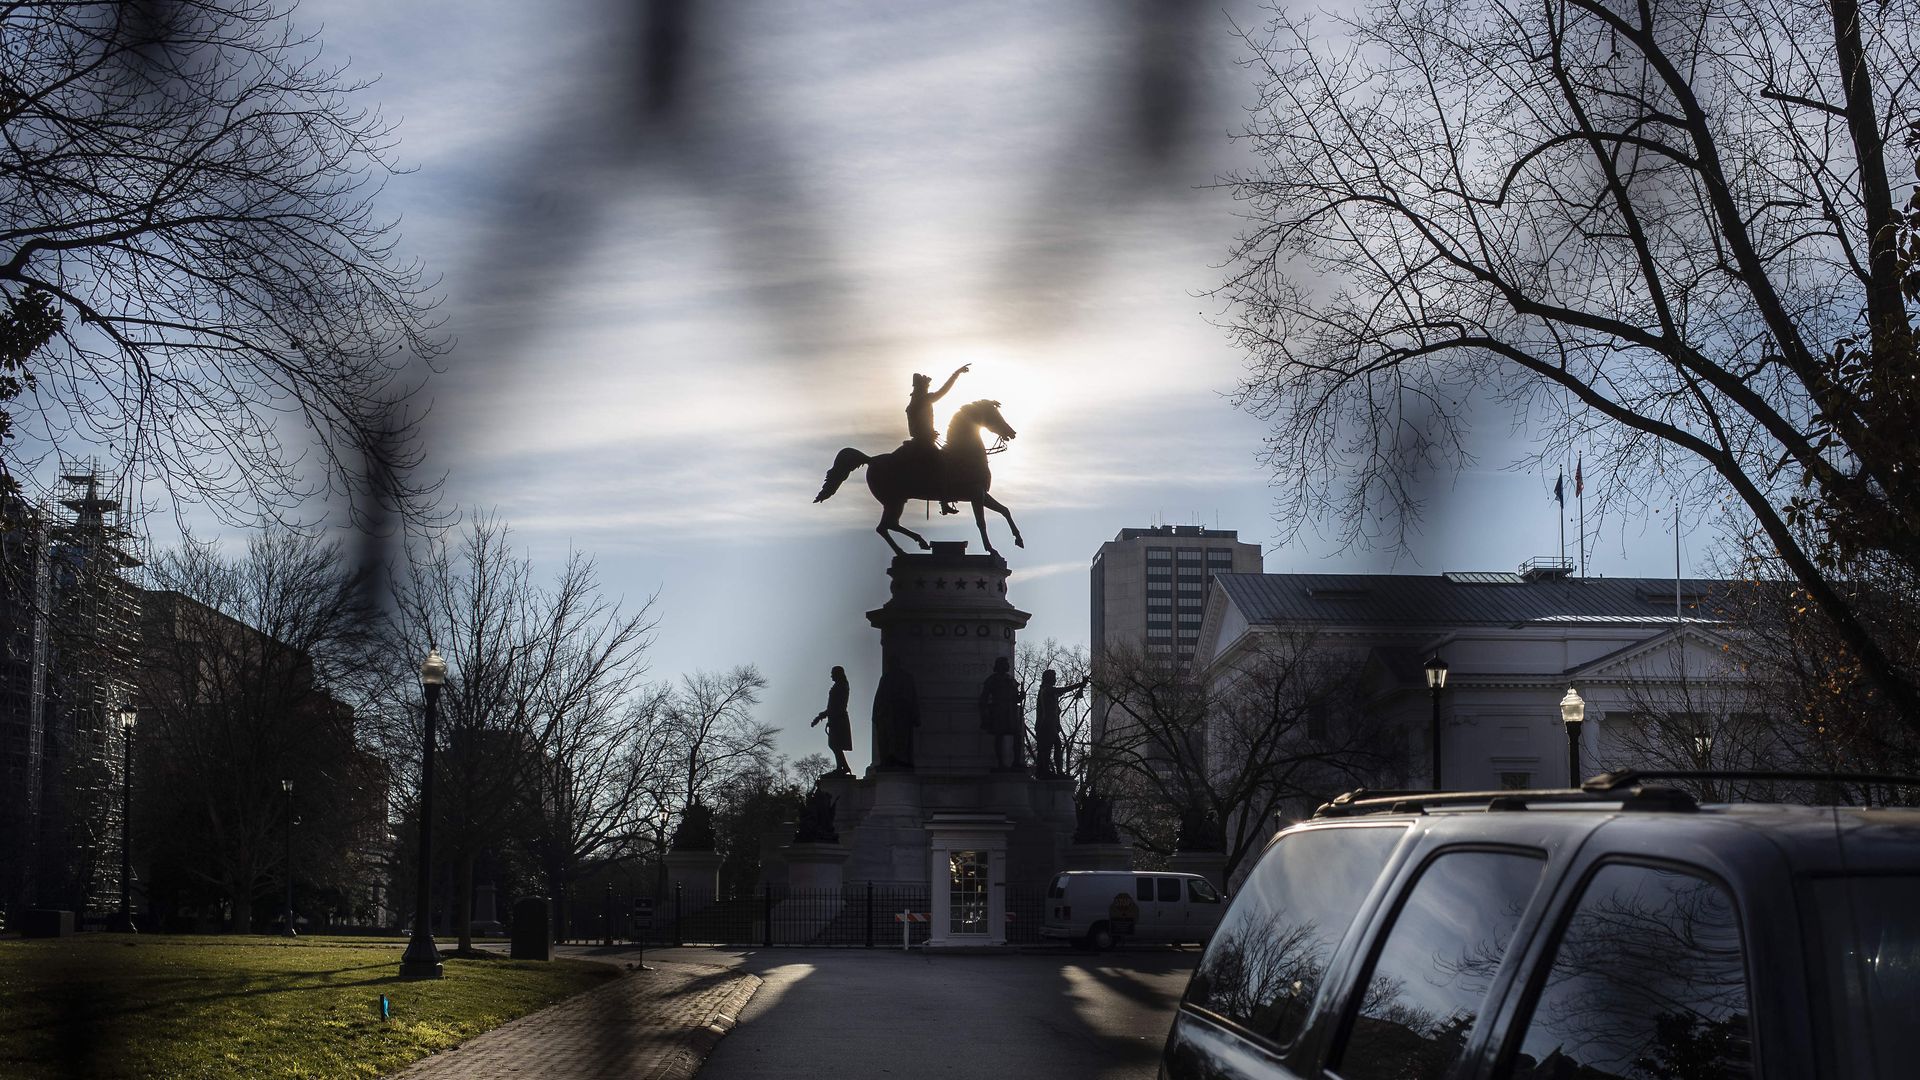 Photo of a statue in front of the Virginia State Capitol, photographed through a fence